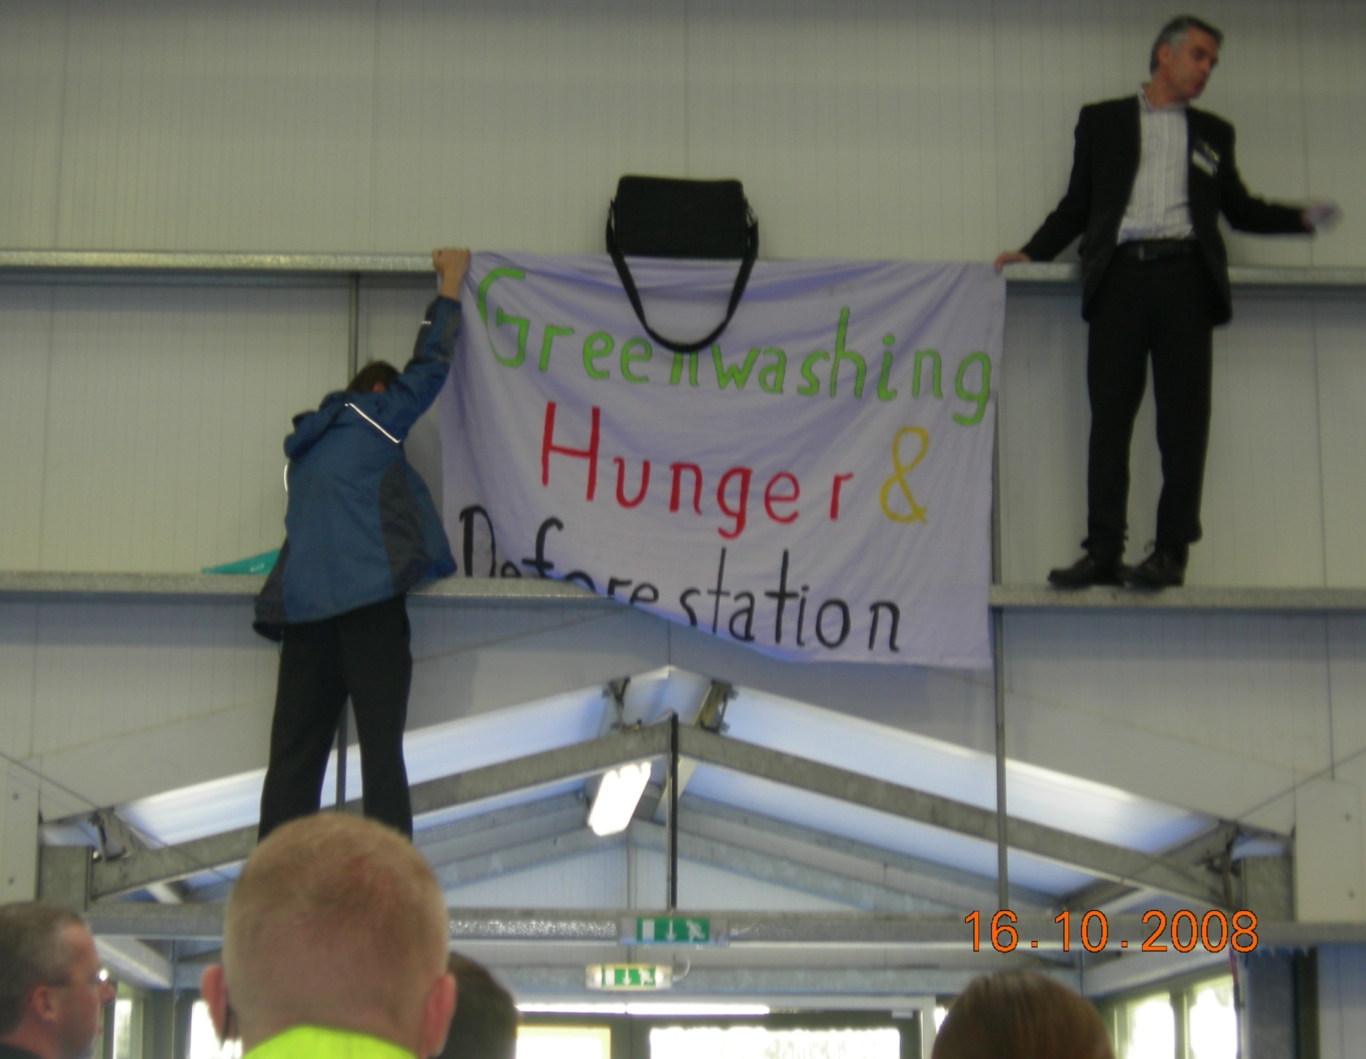 Protestors hang banner inside the exhibition - it was here from 3.5 hours.